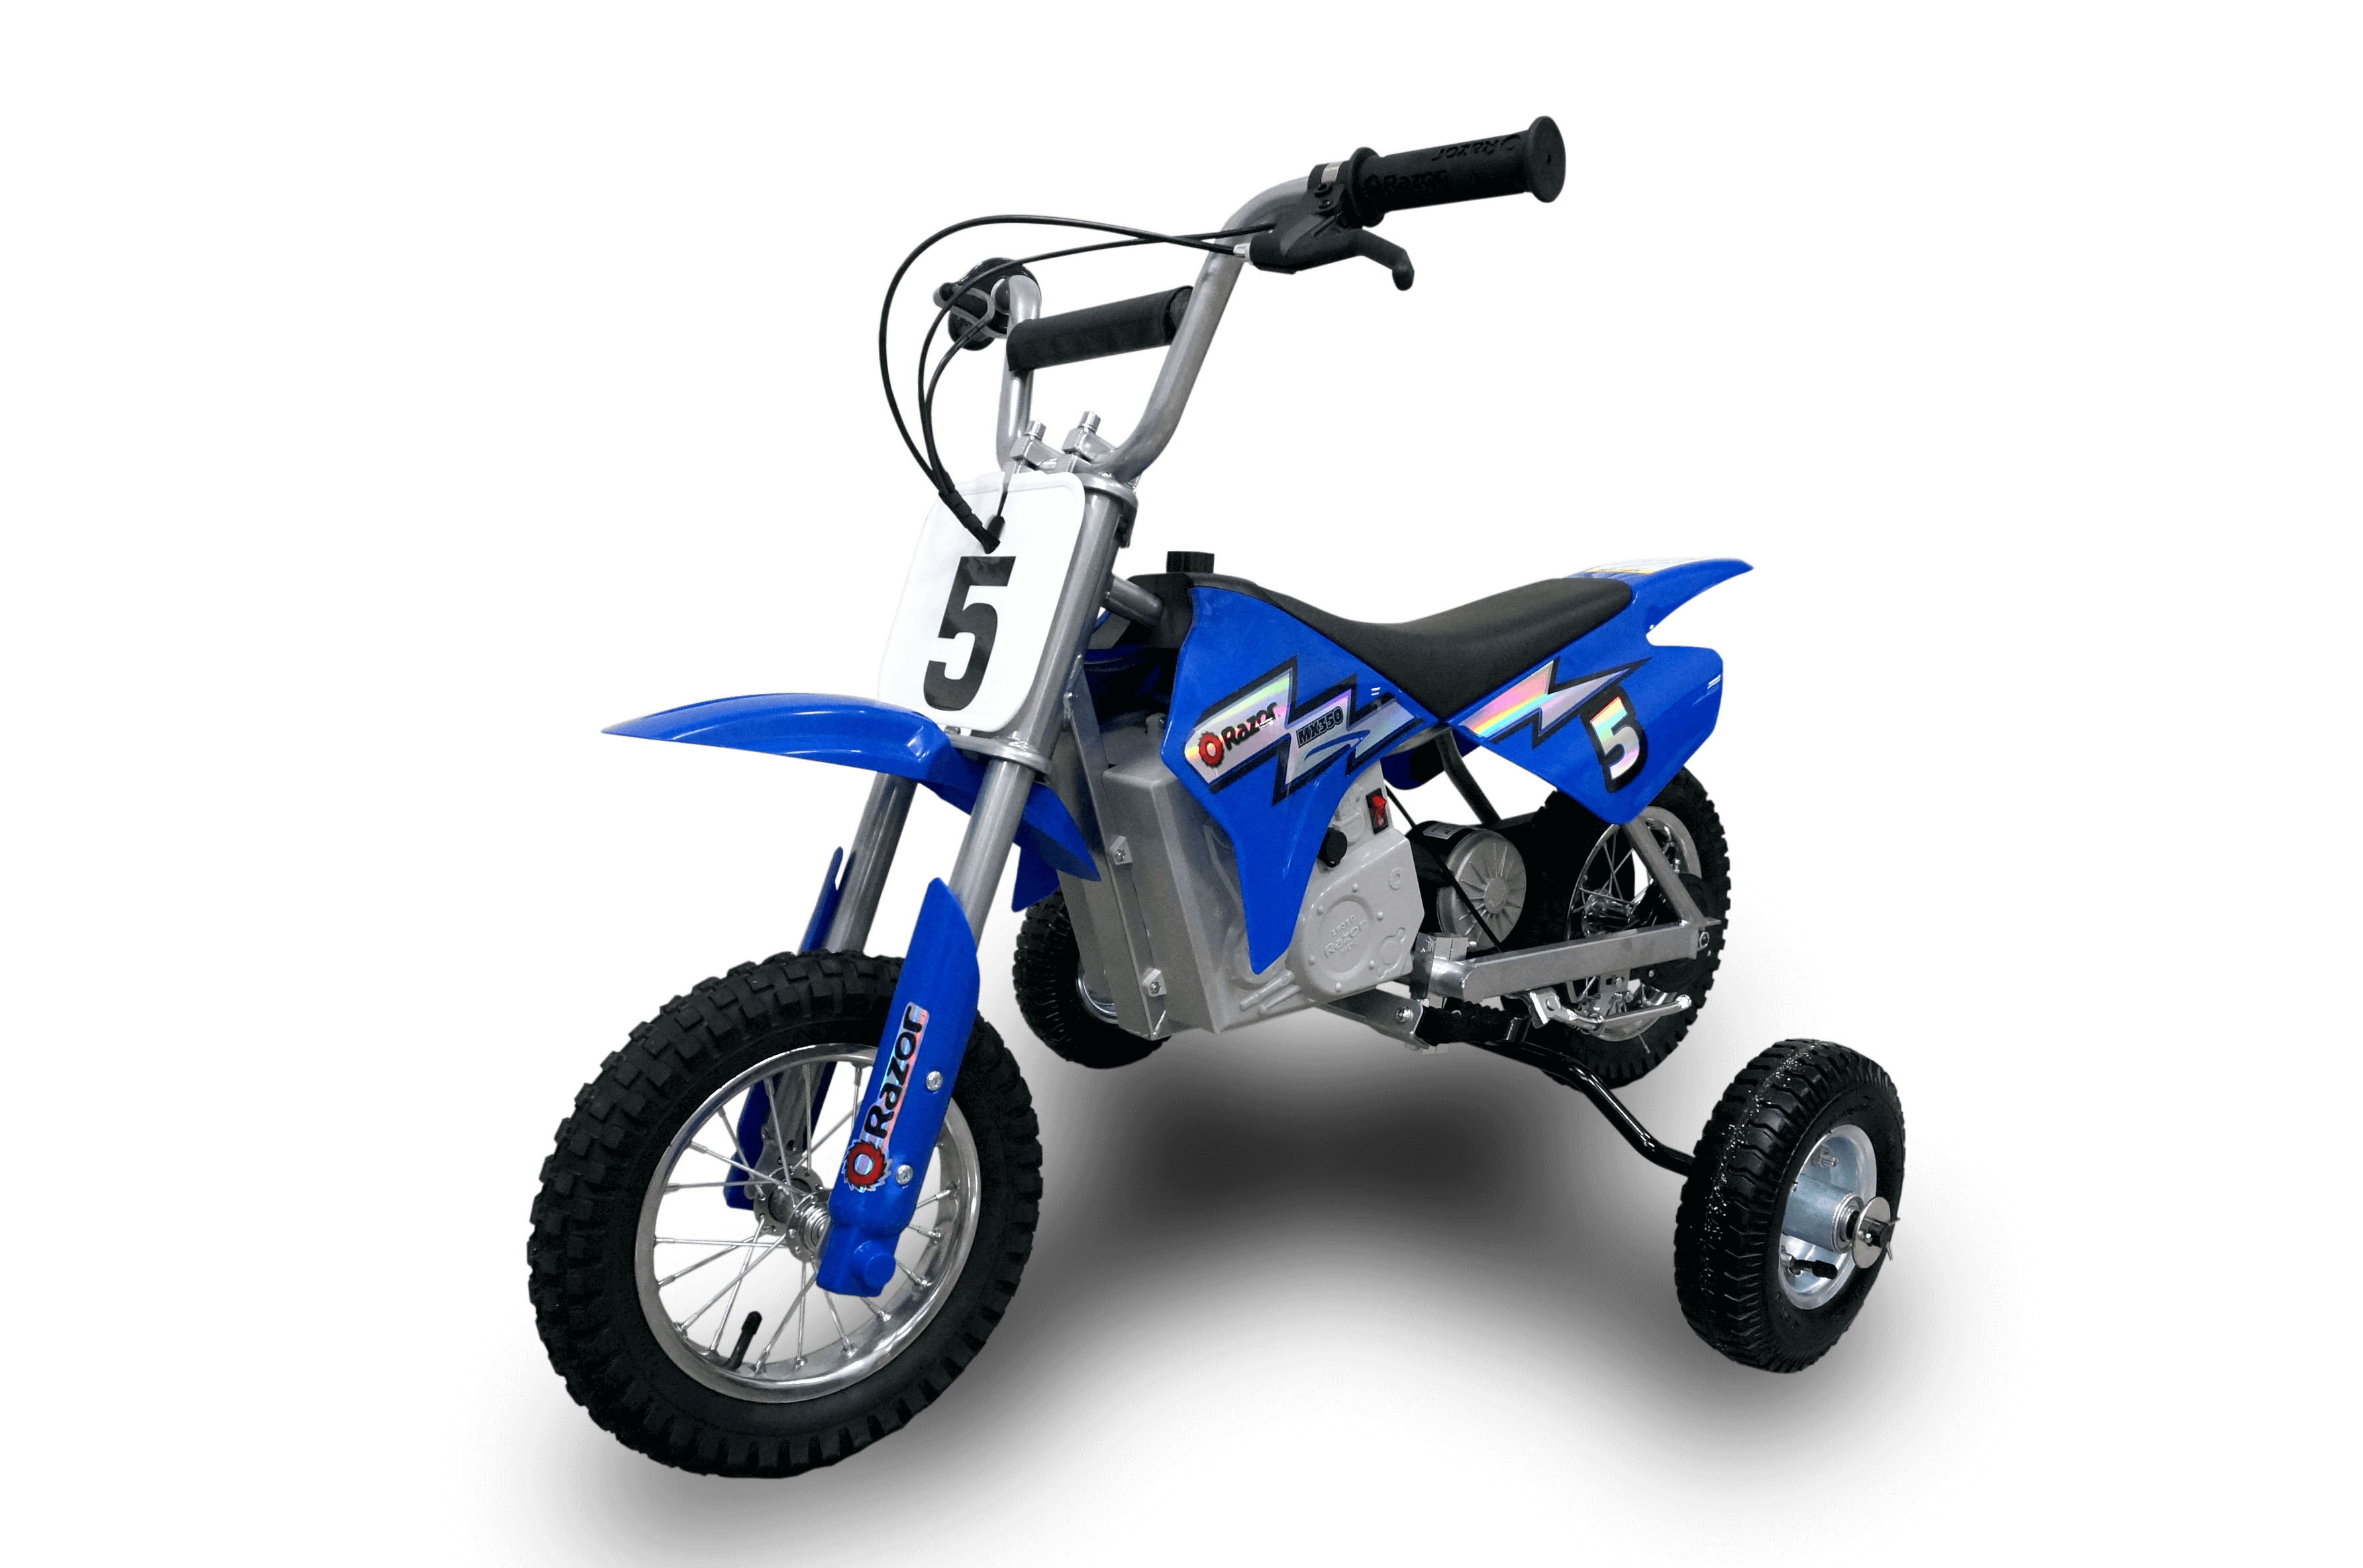 24v motorcycle with training wheels